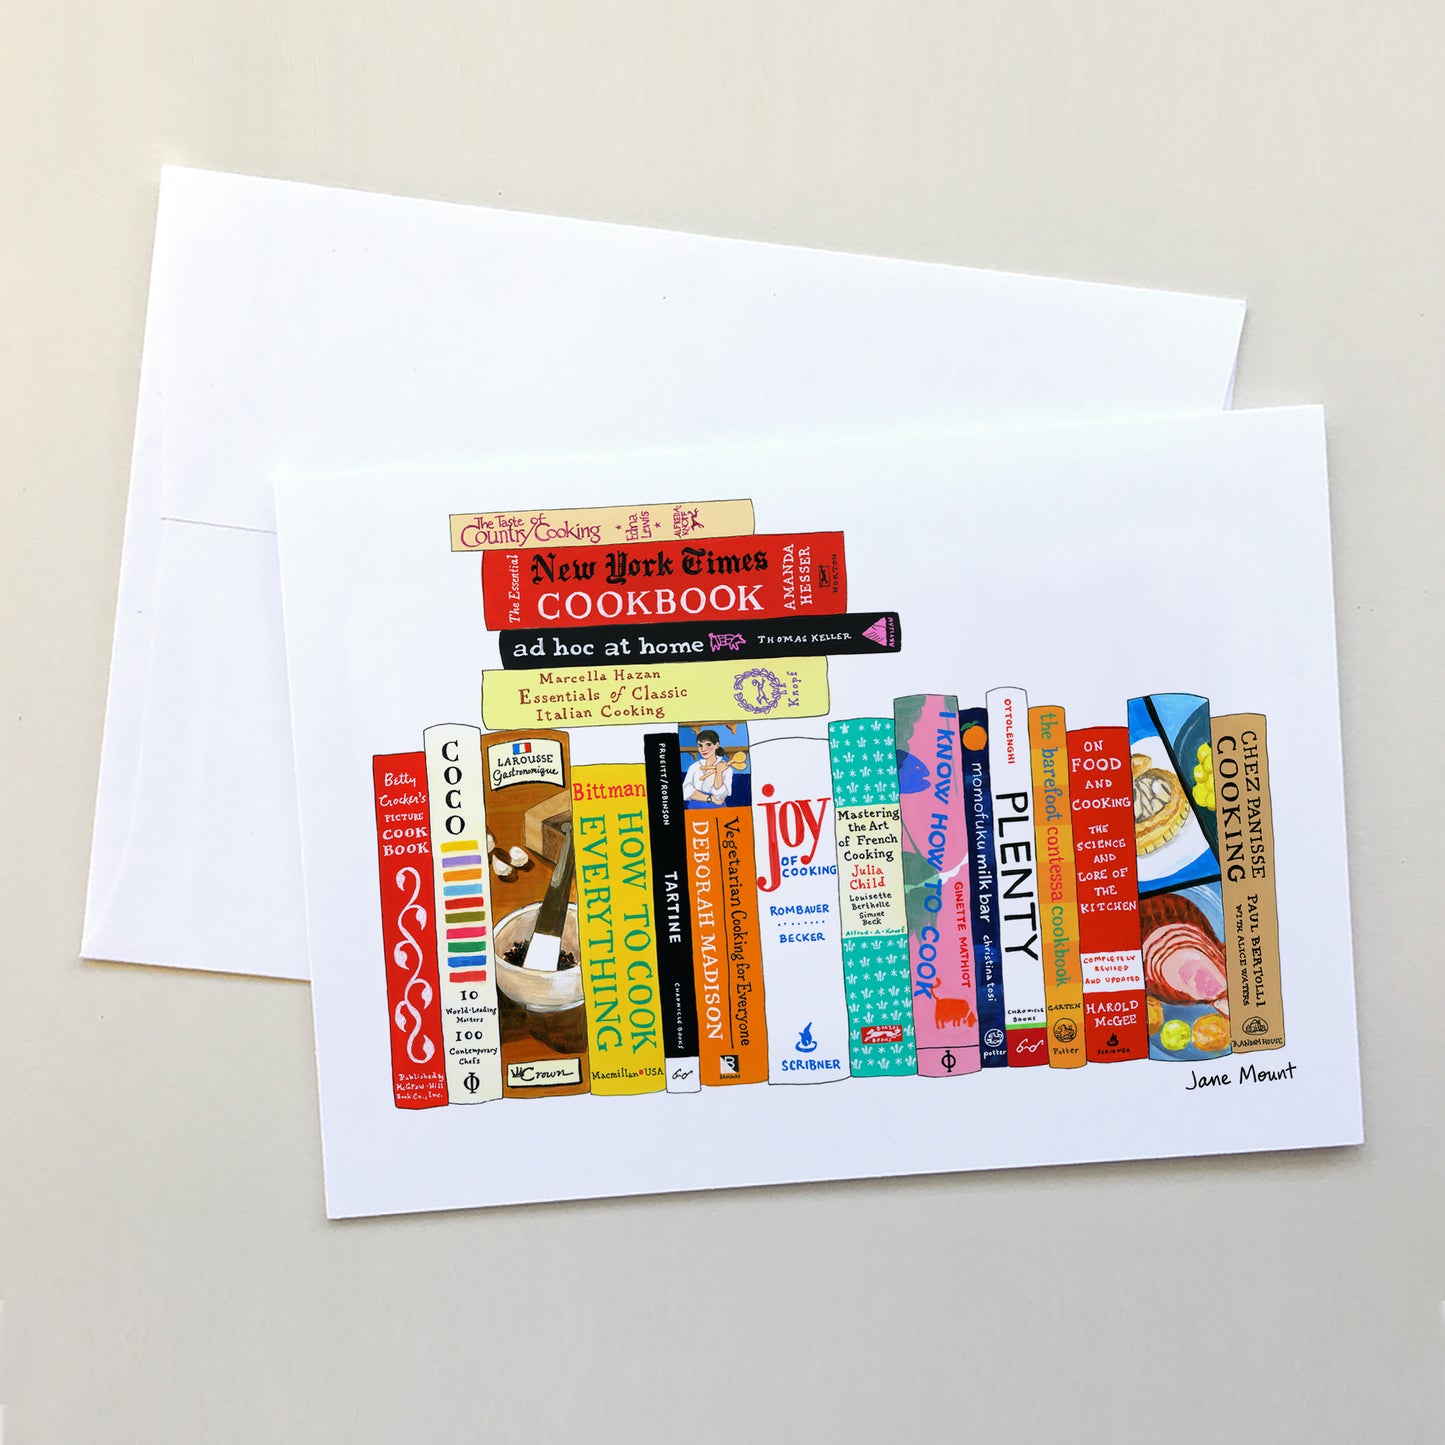 Greeting Cards - Ideal Bookshelf 967: Cooking